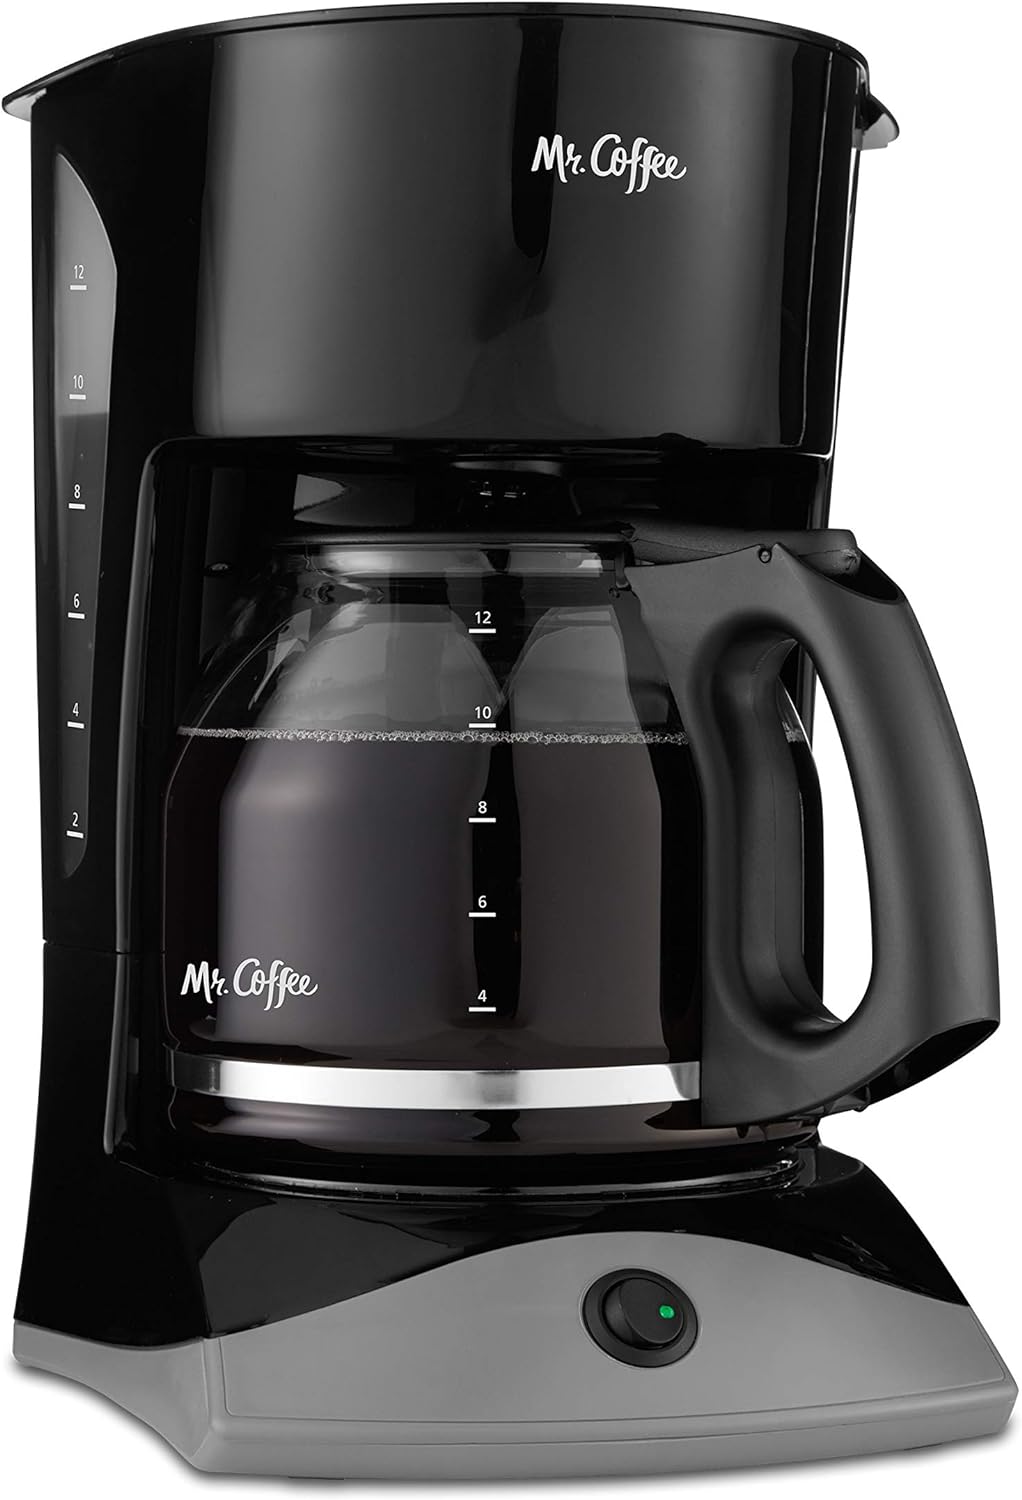 Mr. Coffee Coffee Maker with Auto Pause and Glass Carafe, 12 Cups, Black Review